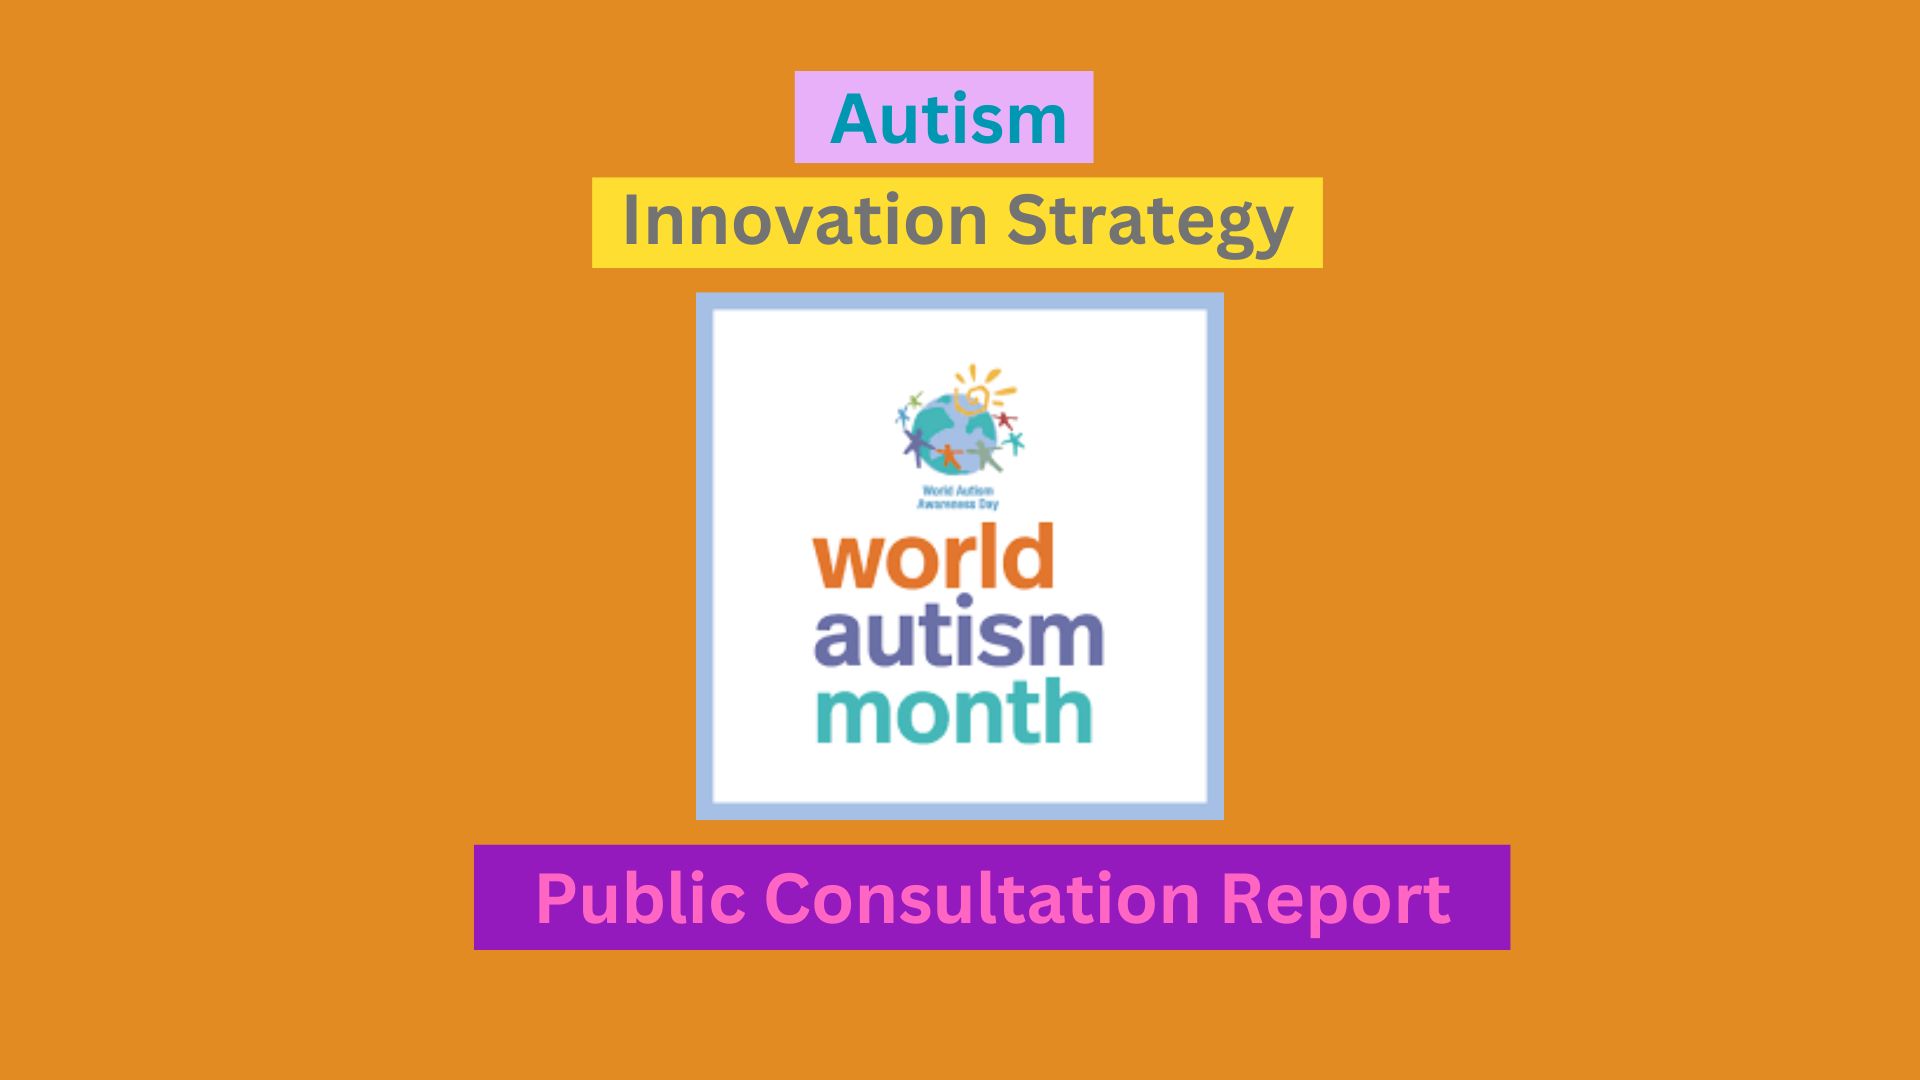 Minister Rabbitte publishes Autism Innovation Strategy Public Consultation Report